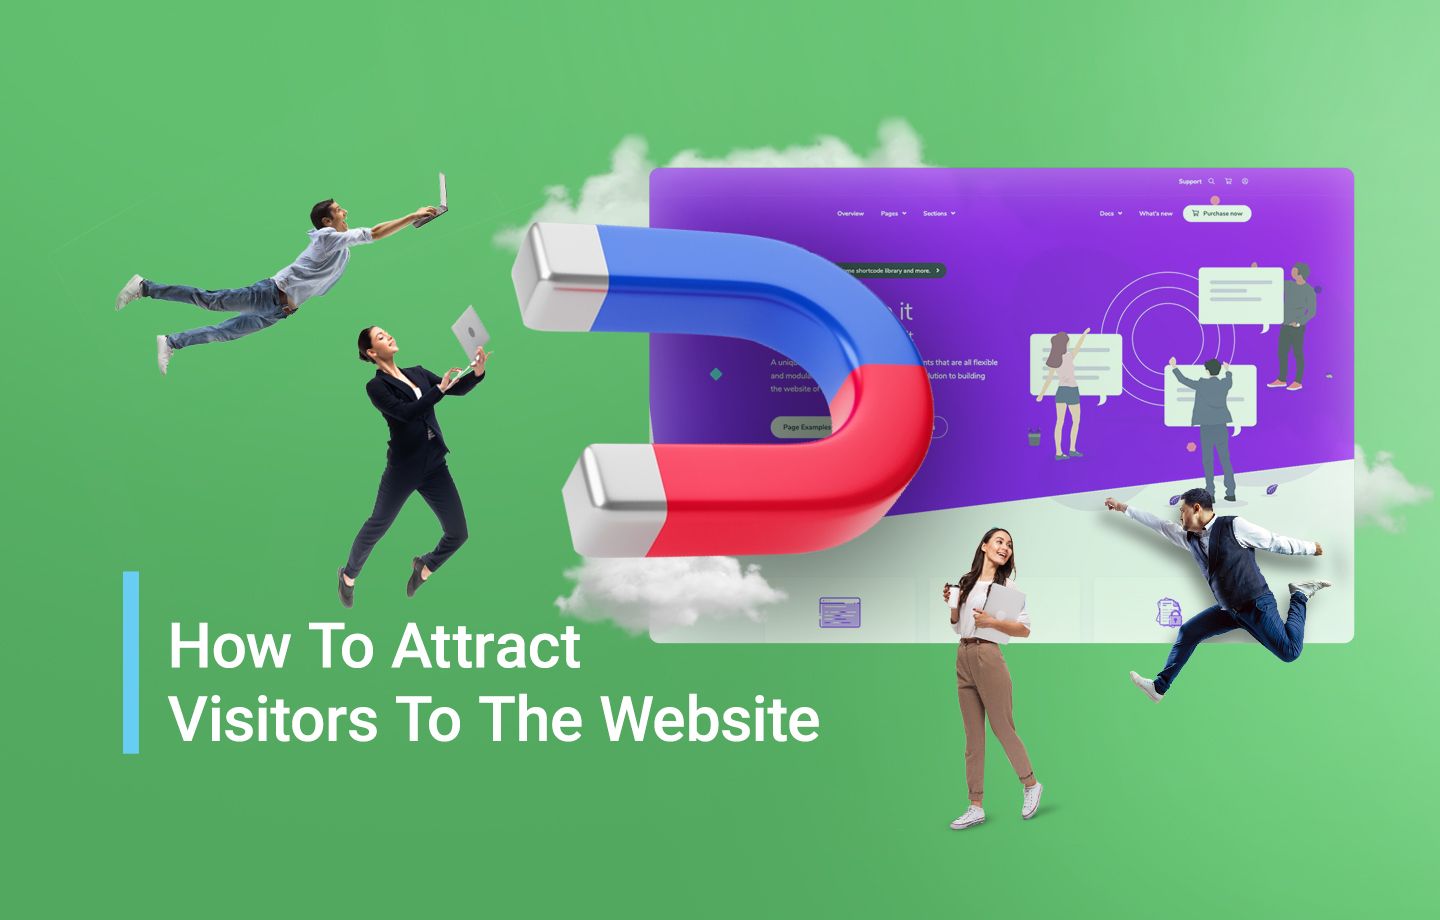 How To Attract Visitors To The Website